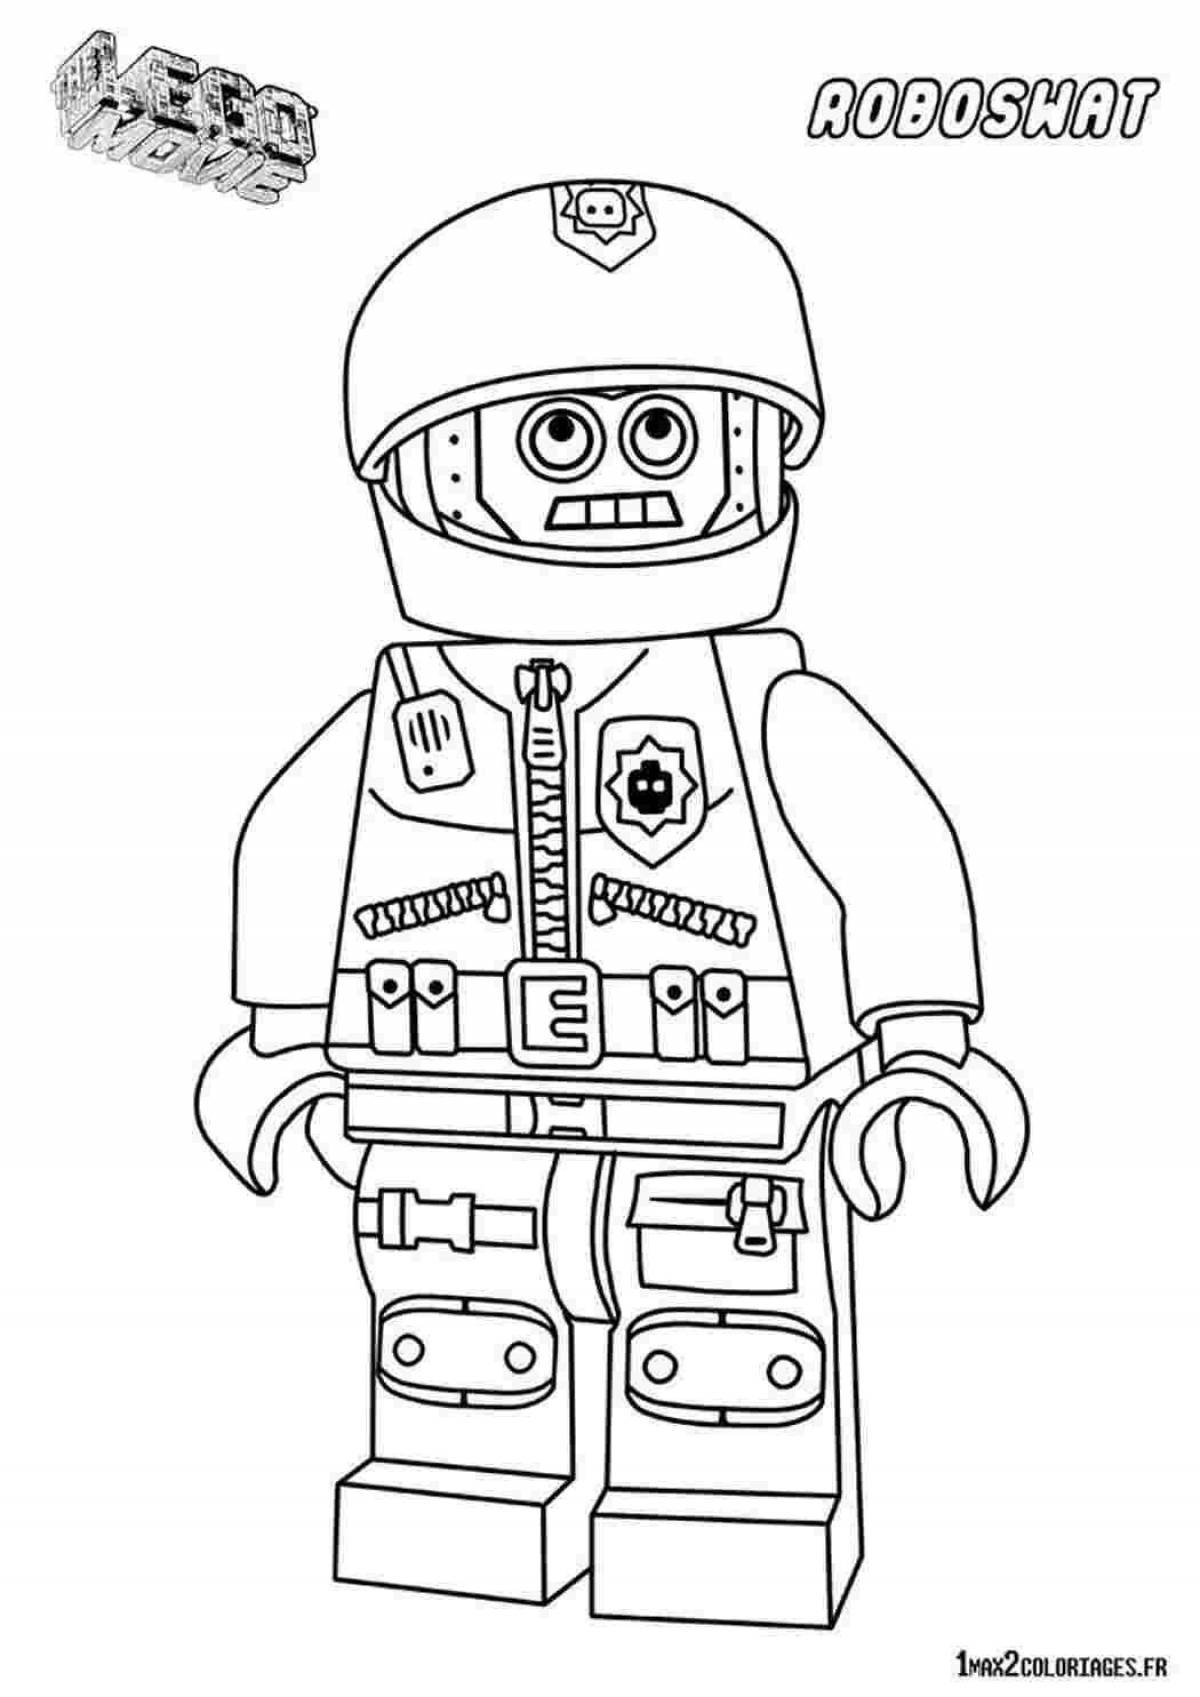 Coloring page adorable lego robot